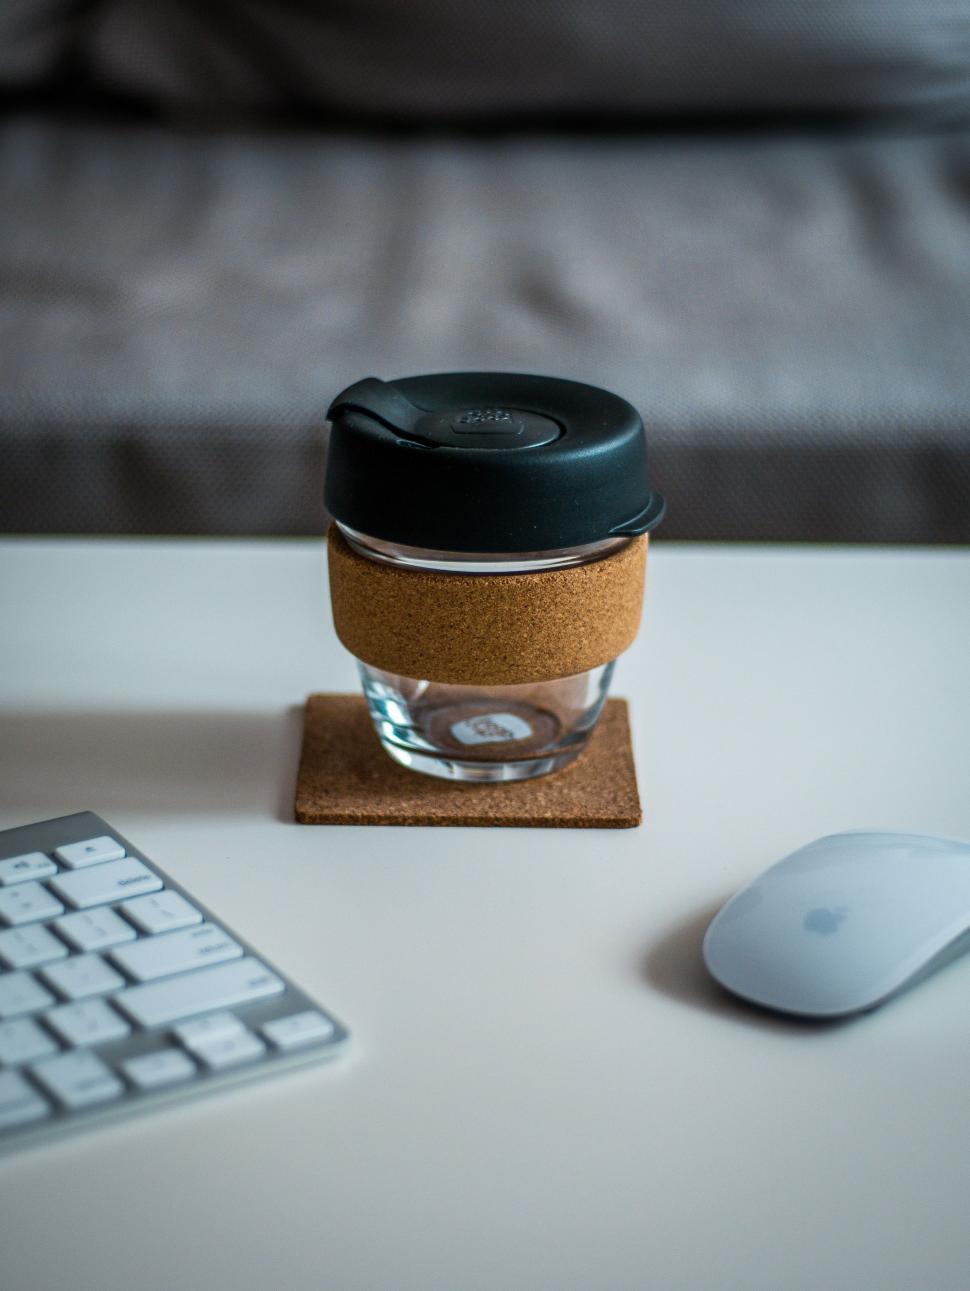 Free Image of Coffee Cup on Coaster Next to Keyboard 